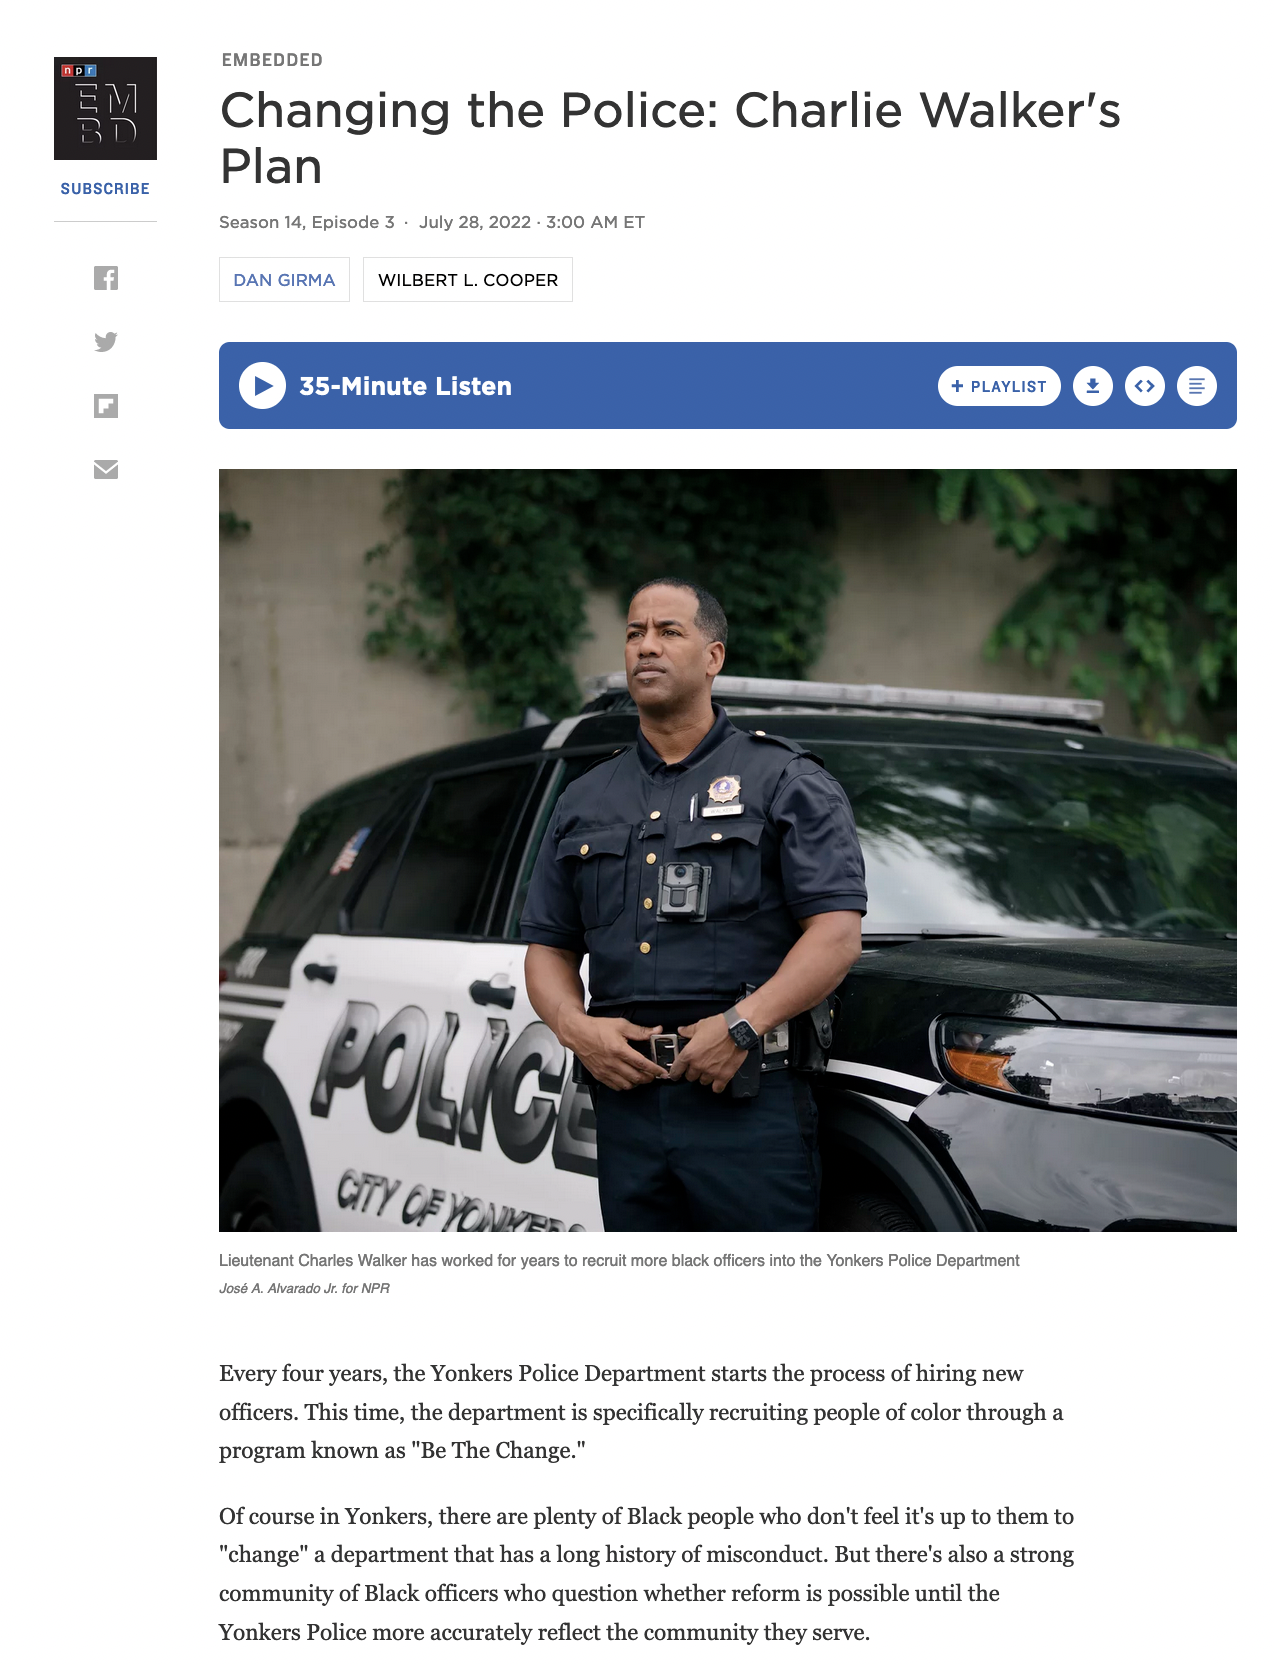 Thumbnail of for The Marshall Project and NPR’s Embedded: Changing the Police, Charlie Walker's Plan